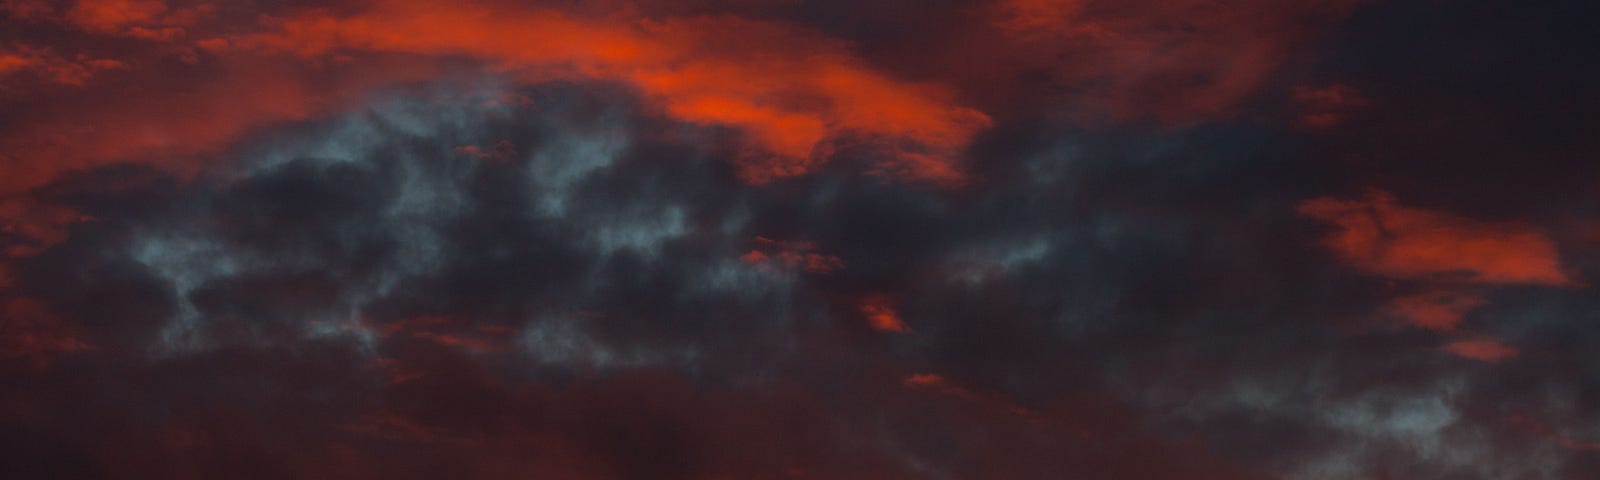 A fierce sky with dark red and grey clouds